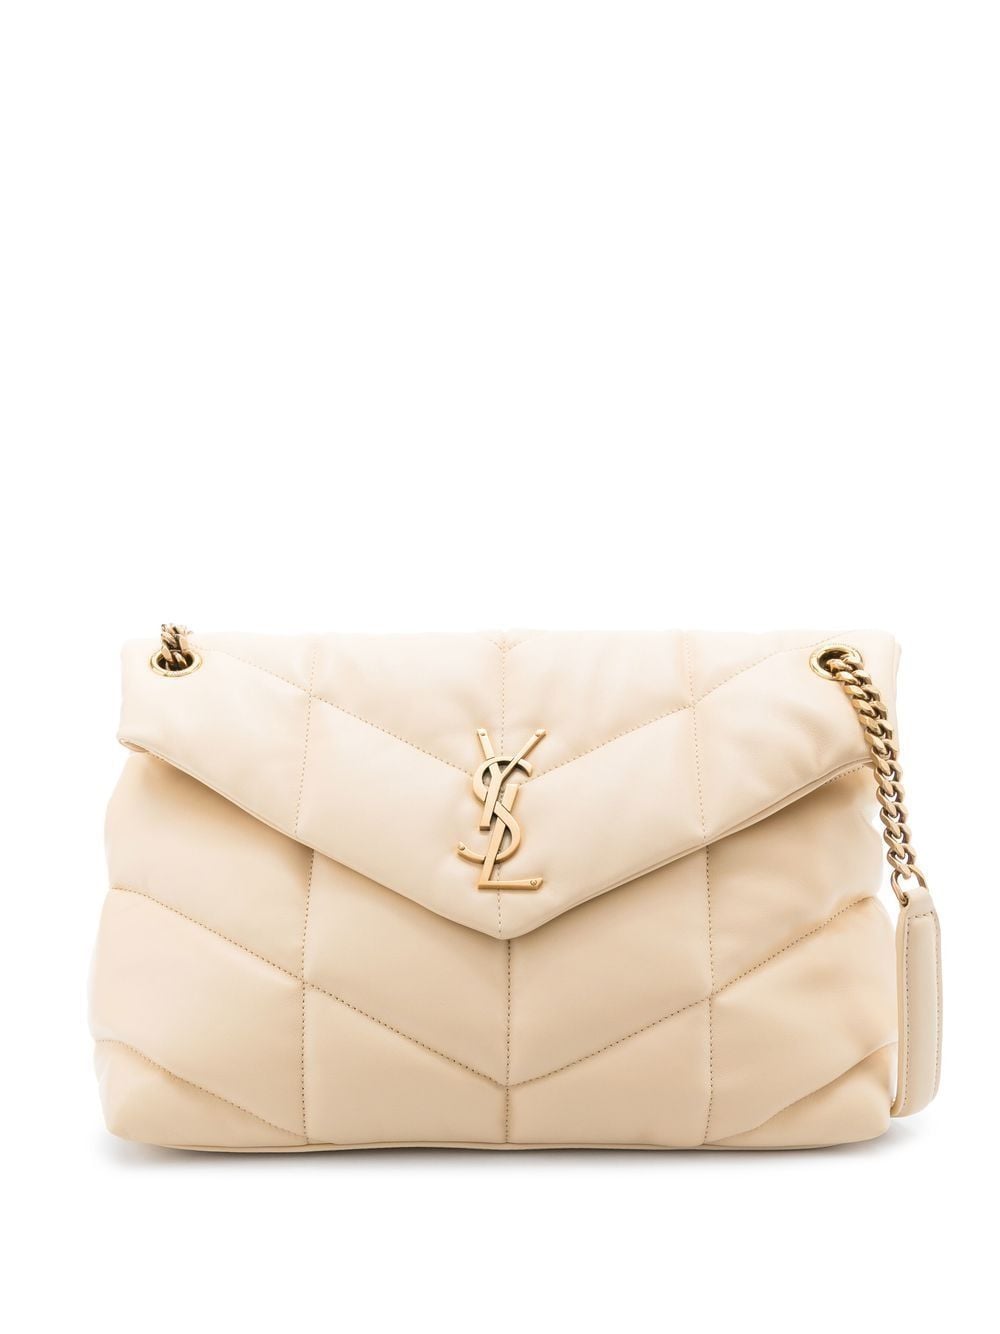 Saint Laurent Loulou Puffer Quilted Shoulder Bag In 9949 -jaune Pale